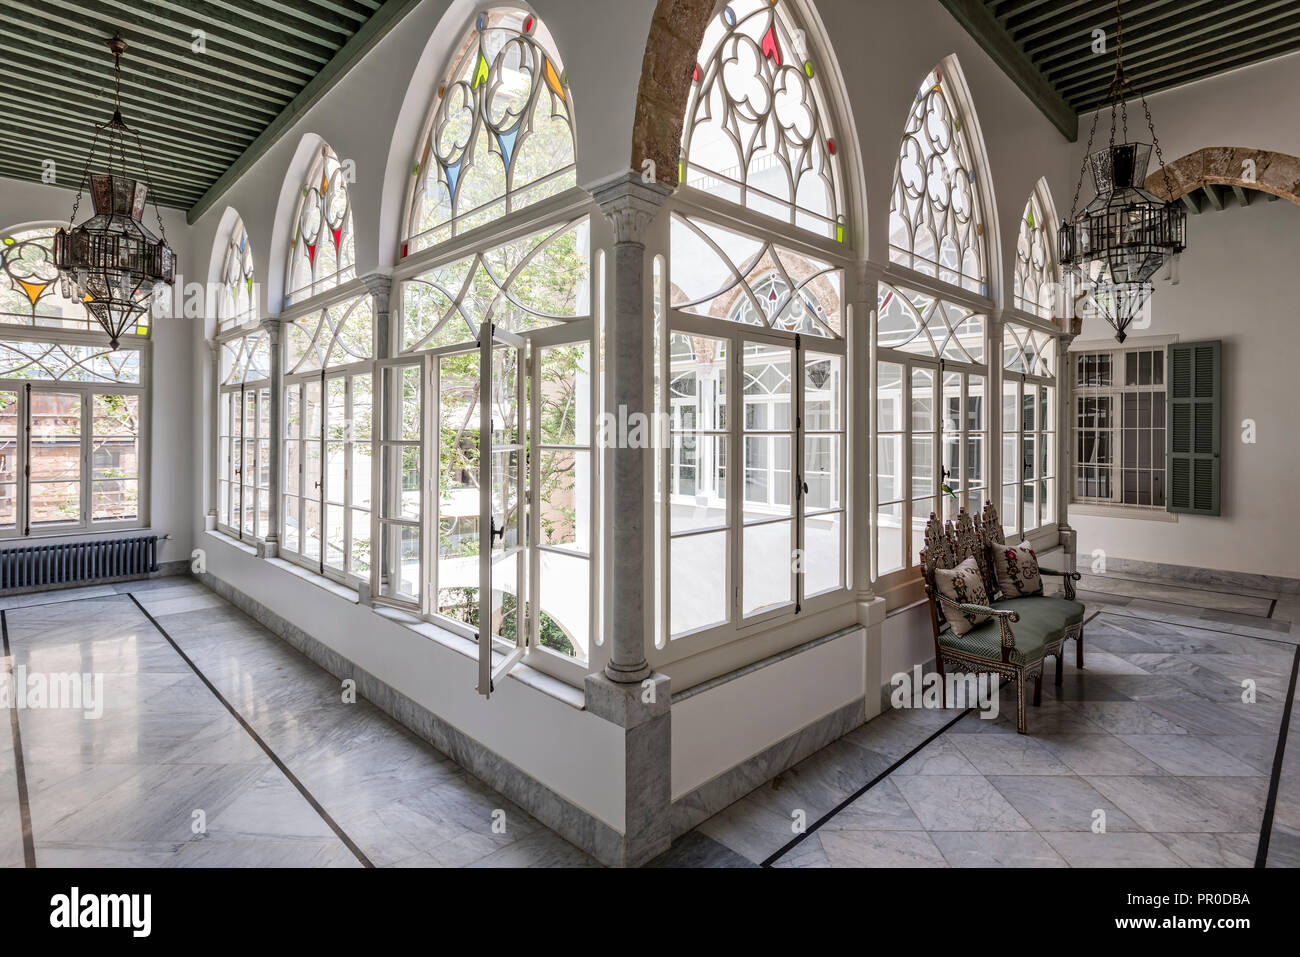 Nine glazed arches form gallery above courtyard. Stock Photo